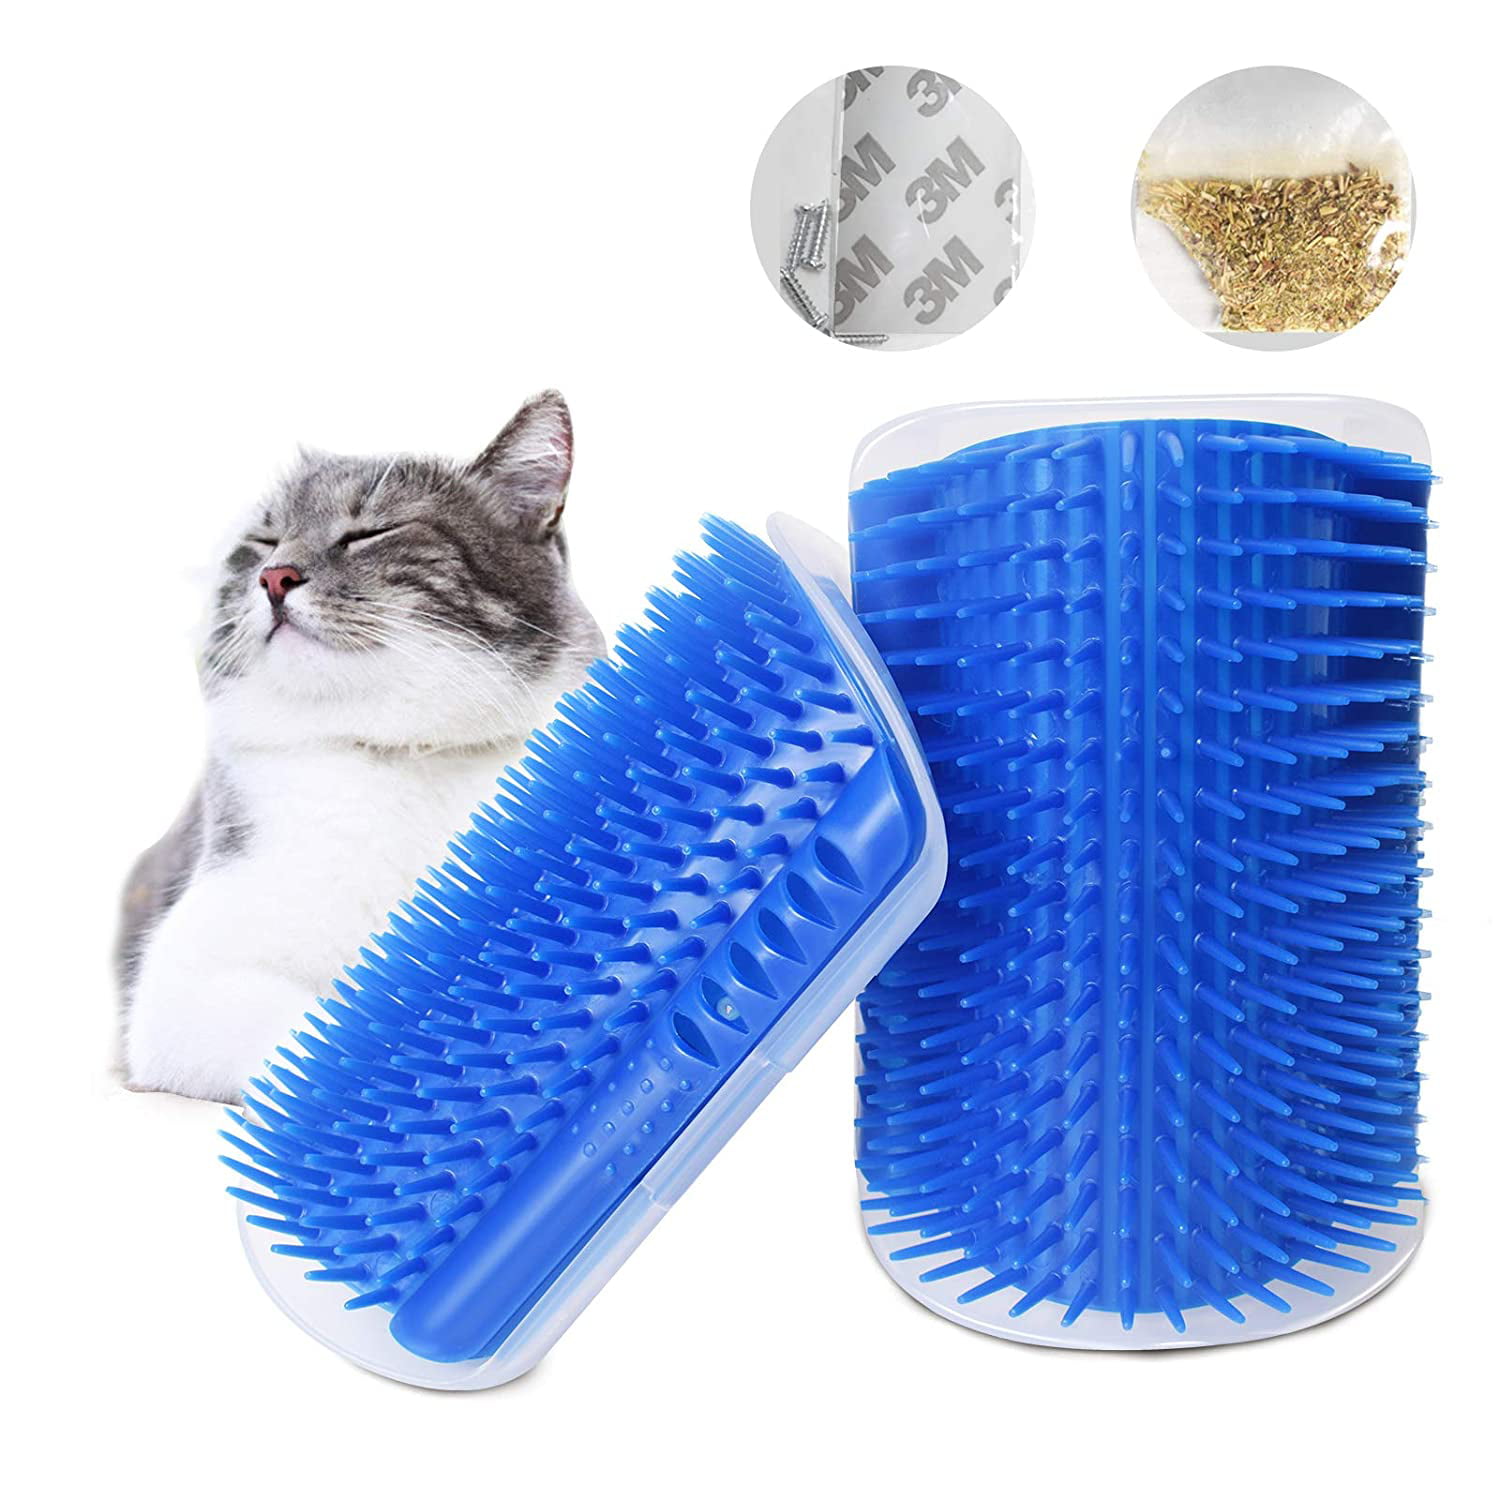 2 Pcs Cat Self Corner Groomer,Cat Self Grooming Brush,Cat Scratcher Comb Massage Toy With Catnip Pouch Kitten Massaging Wall Corner Mounted Massage Itching Tool for Hairballs and Shedding-Safe L/M